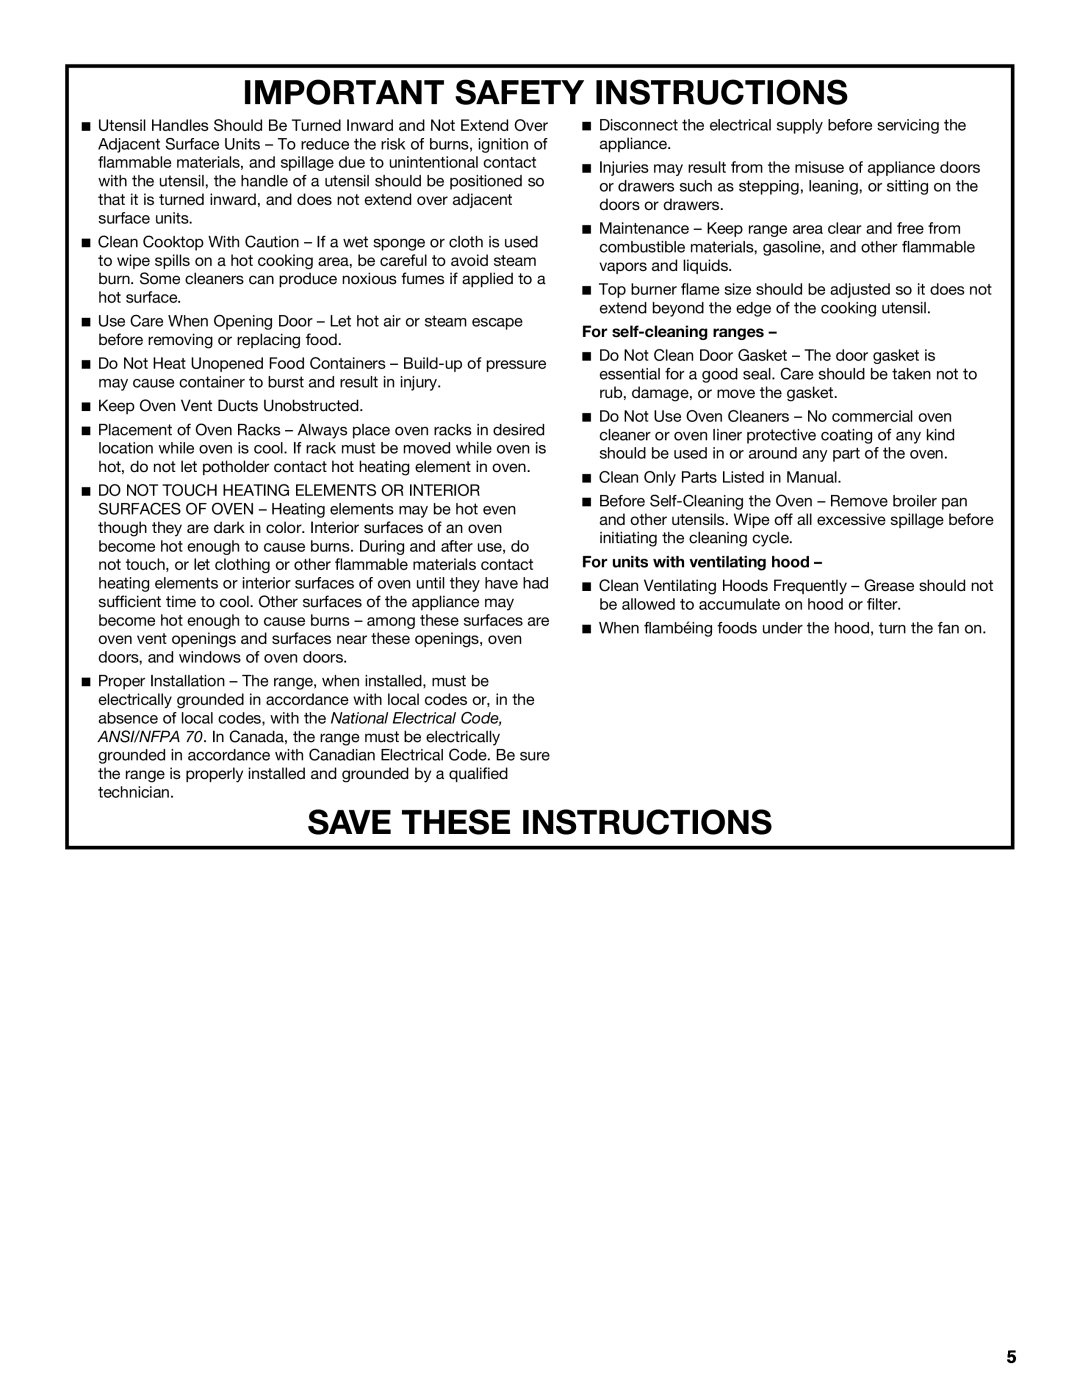 KitchenAid KDRS467, KDRS463, KDRS483 manual Important Safety Instructions, Save These Instructions, For self-cleaning ranges 